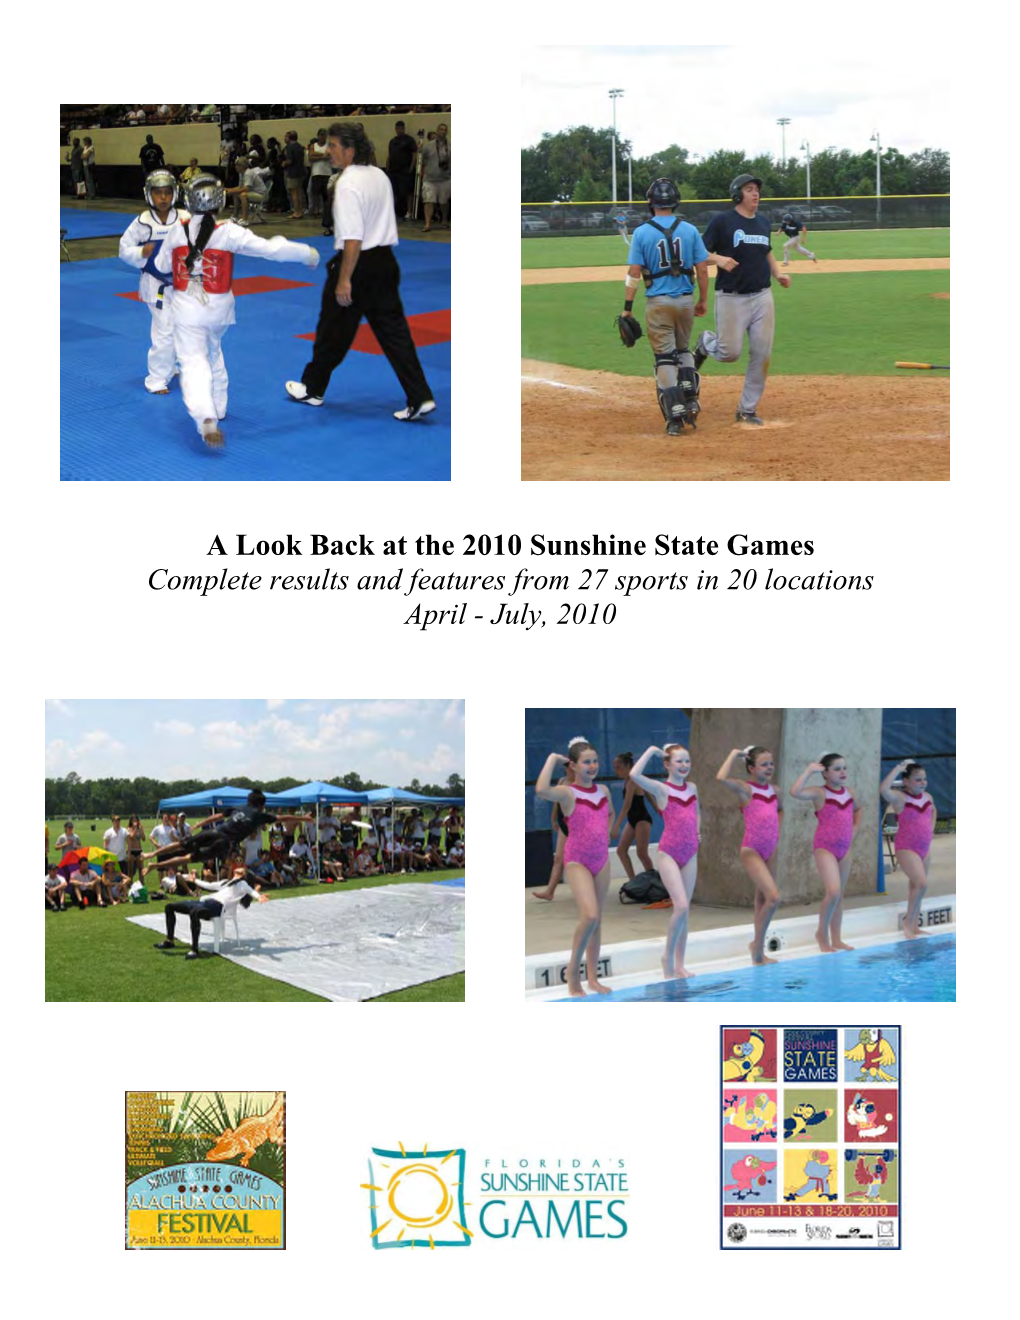 A Look Back at the 2010 Sunshine State Games Complete Results and Features from 27 Sports in 20 Locations April - July, 2010